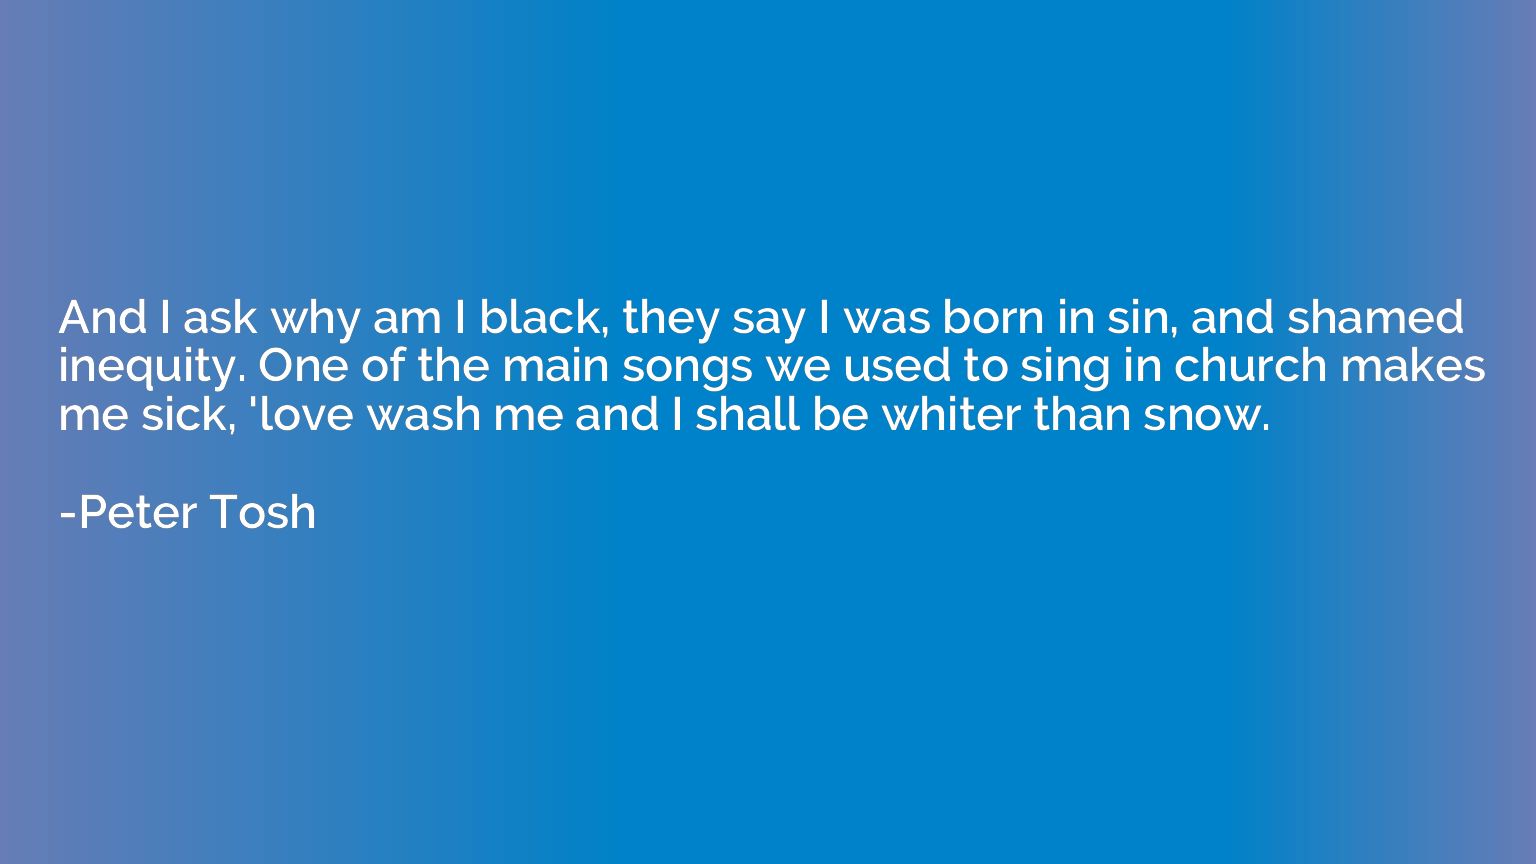 And I ask why am I black, they say I was born in sin, and sh